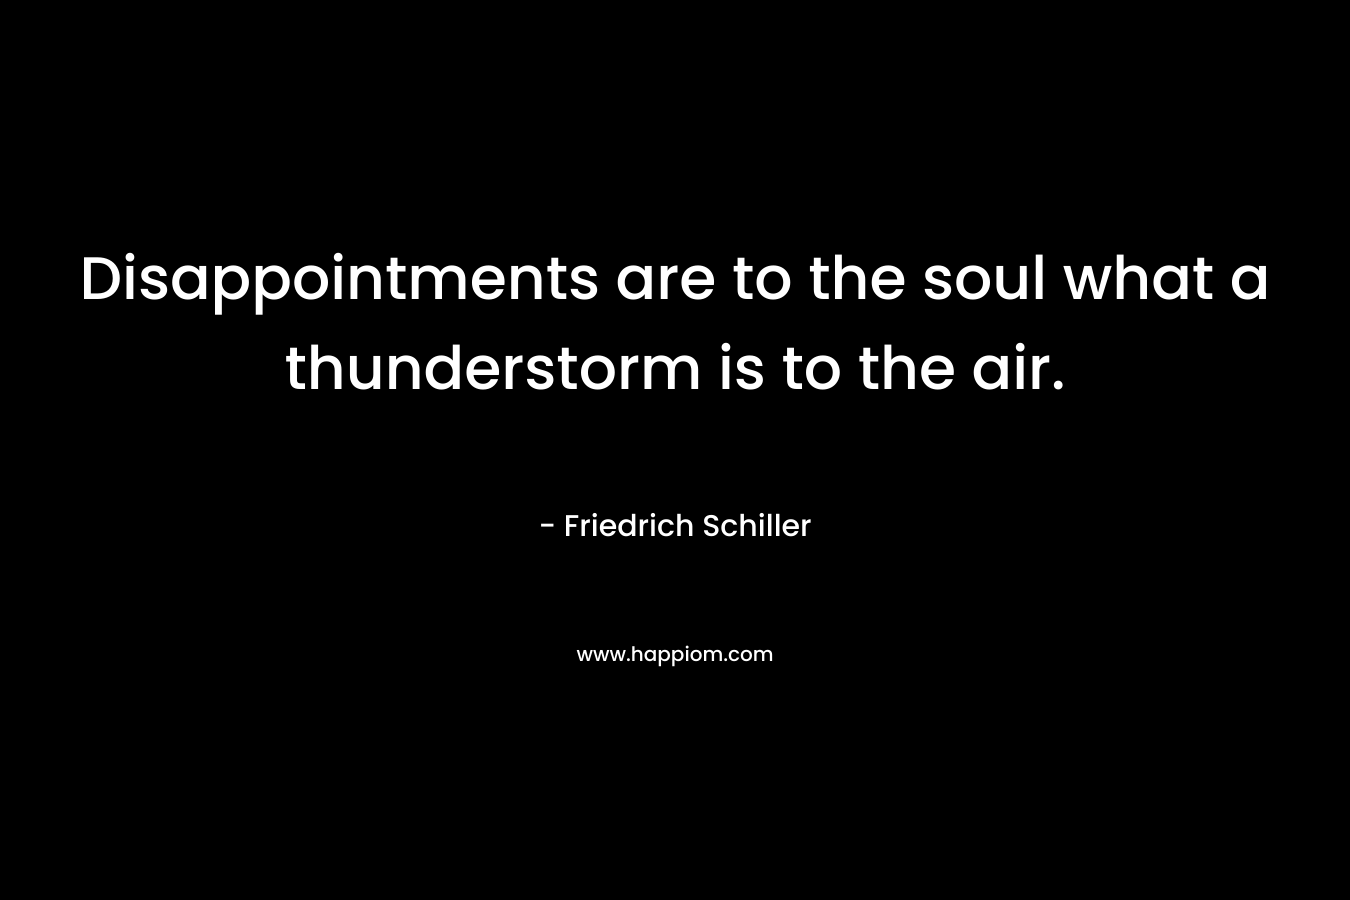 Disappointments are to the soul what a thunderstorm is to the air. – Friedrich Schiller